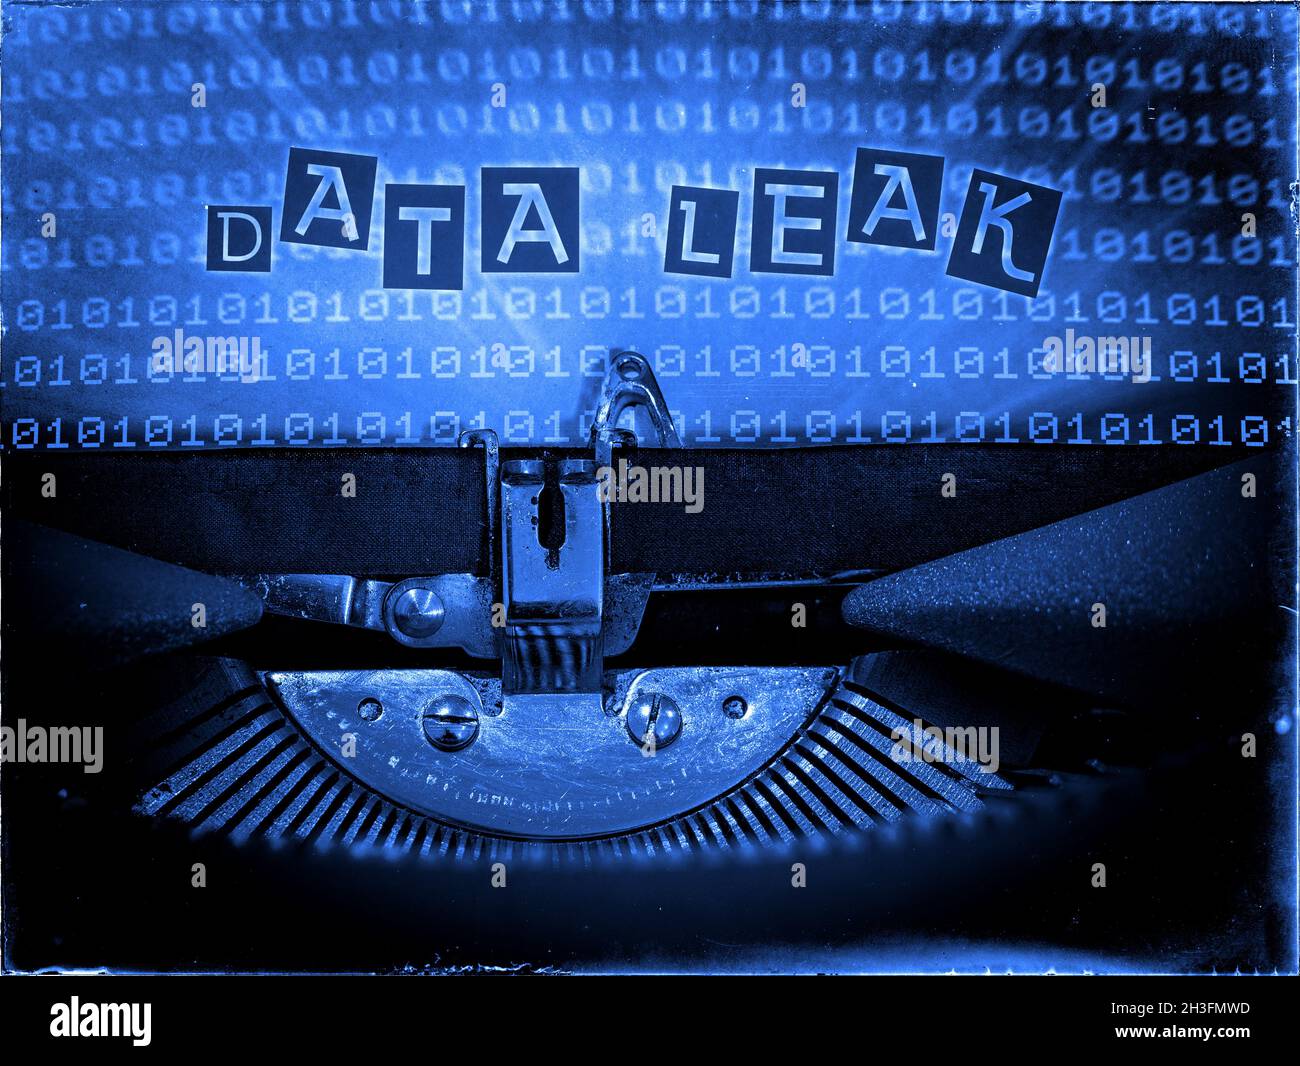 Data Leak displayed on a Mechanical Typewriter with a Binary code background and a Blue tone, Vintage distorted look, Ransom note typography Stock Photo